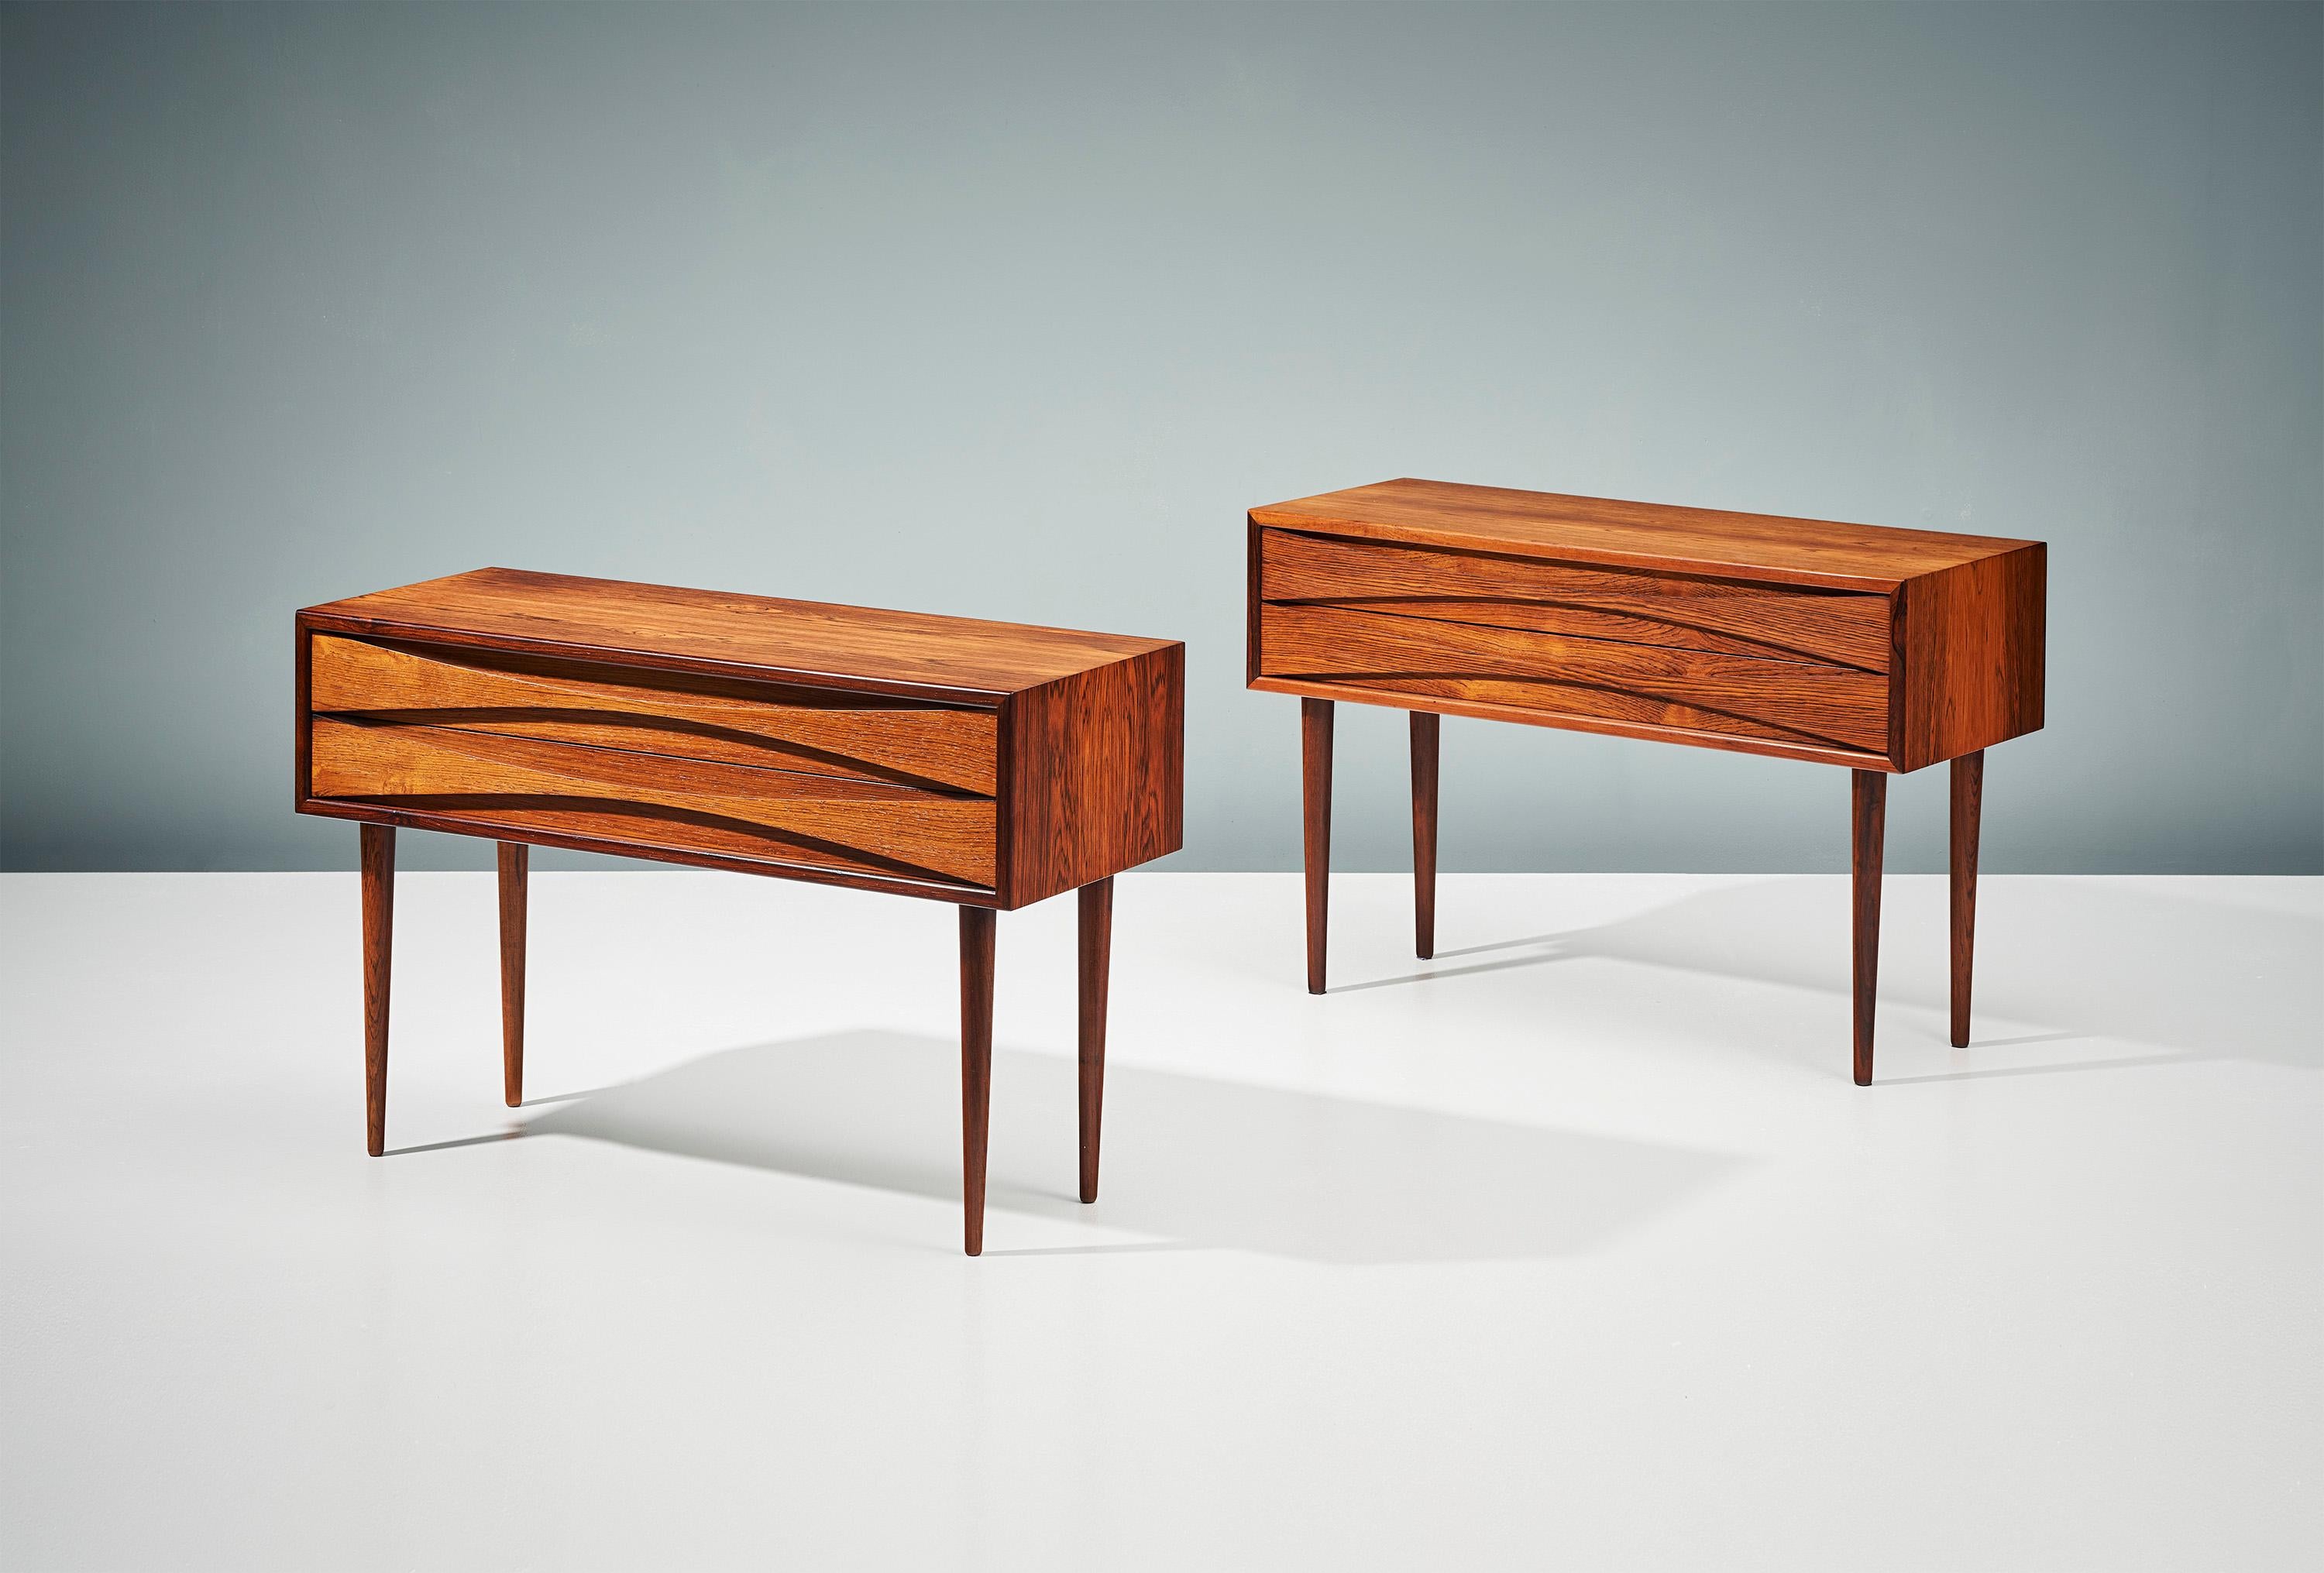 Pair of bedside cabinets, circa 1960

Rosewood cabinets by Niels Clausen for his own company NC Møbler produced in Odense, Denmark, circa 1960. Each wide cabinets has two slim drawers with elegant scalloped drawer-pulls and solid turned and